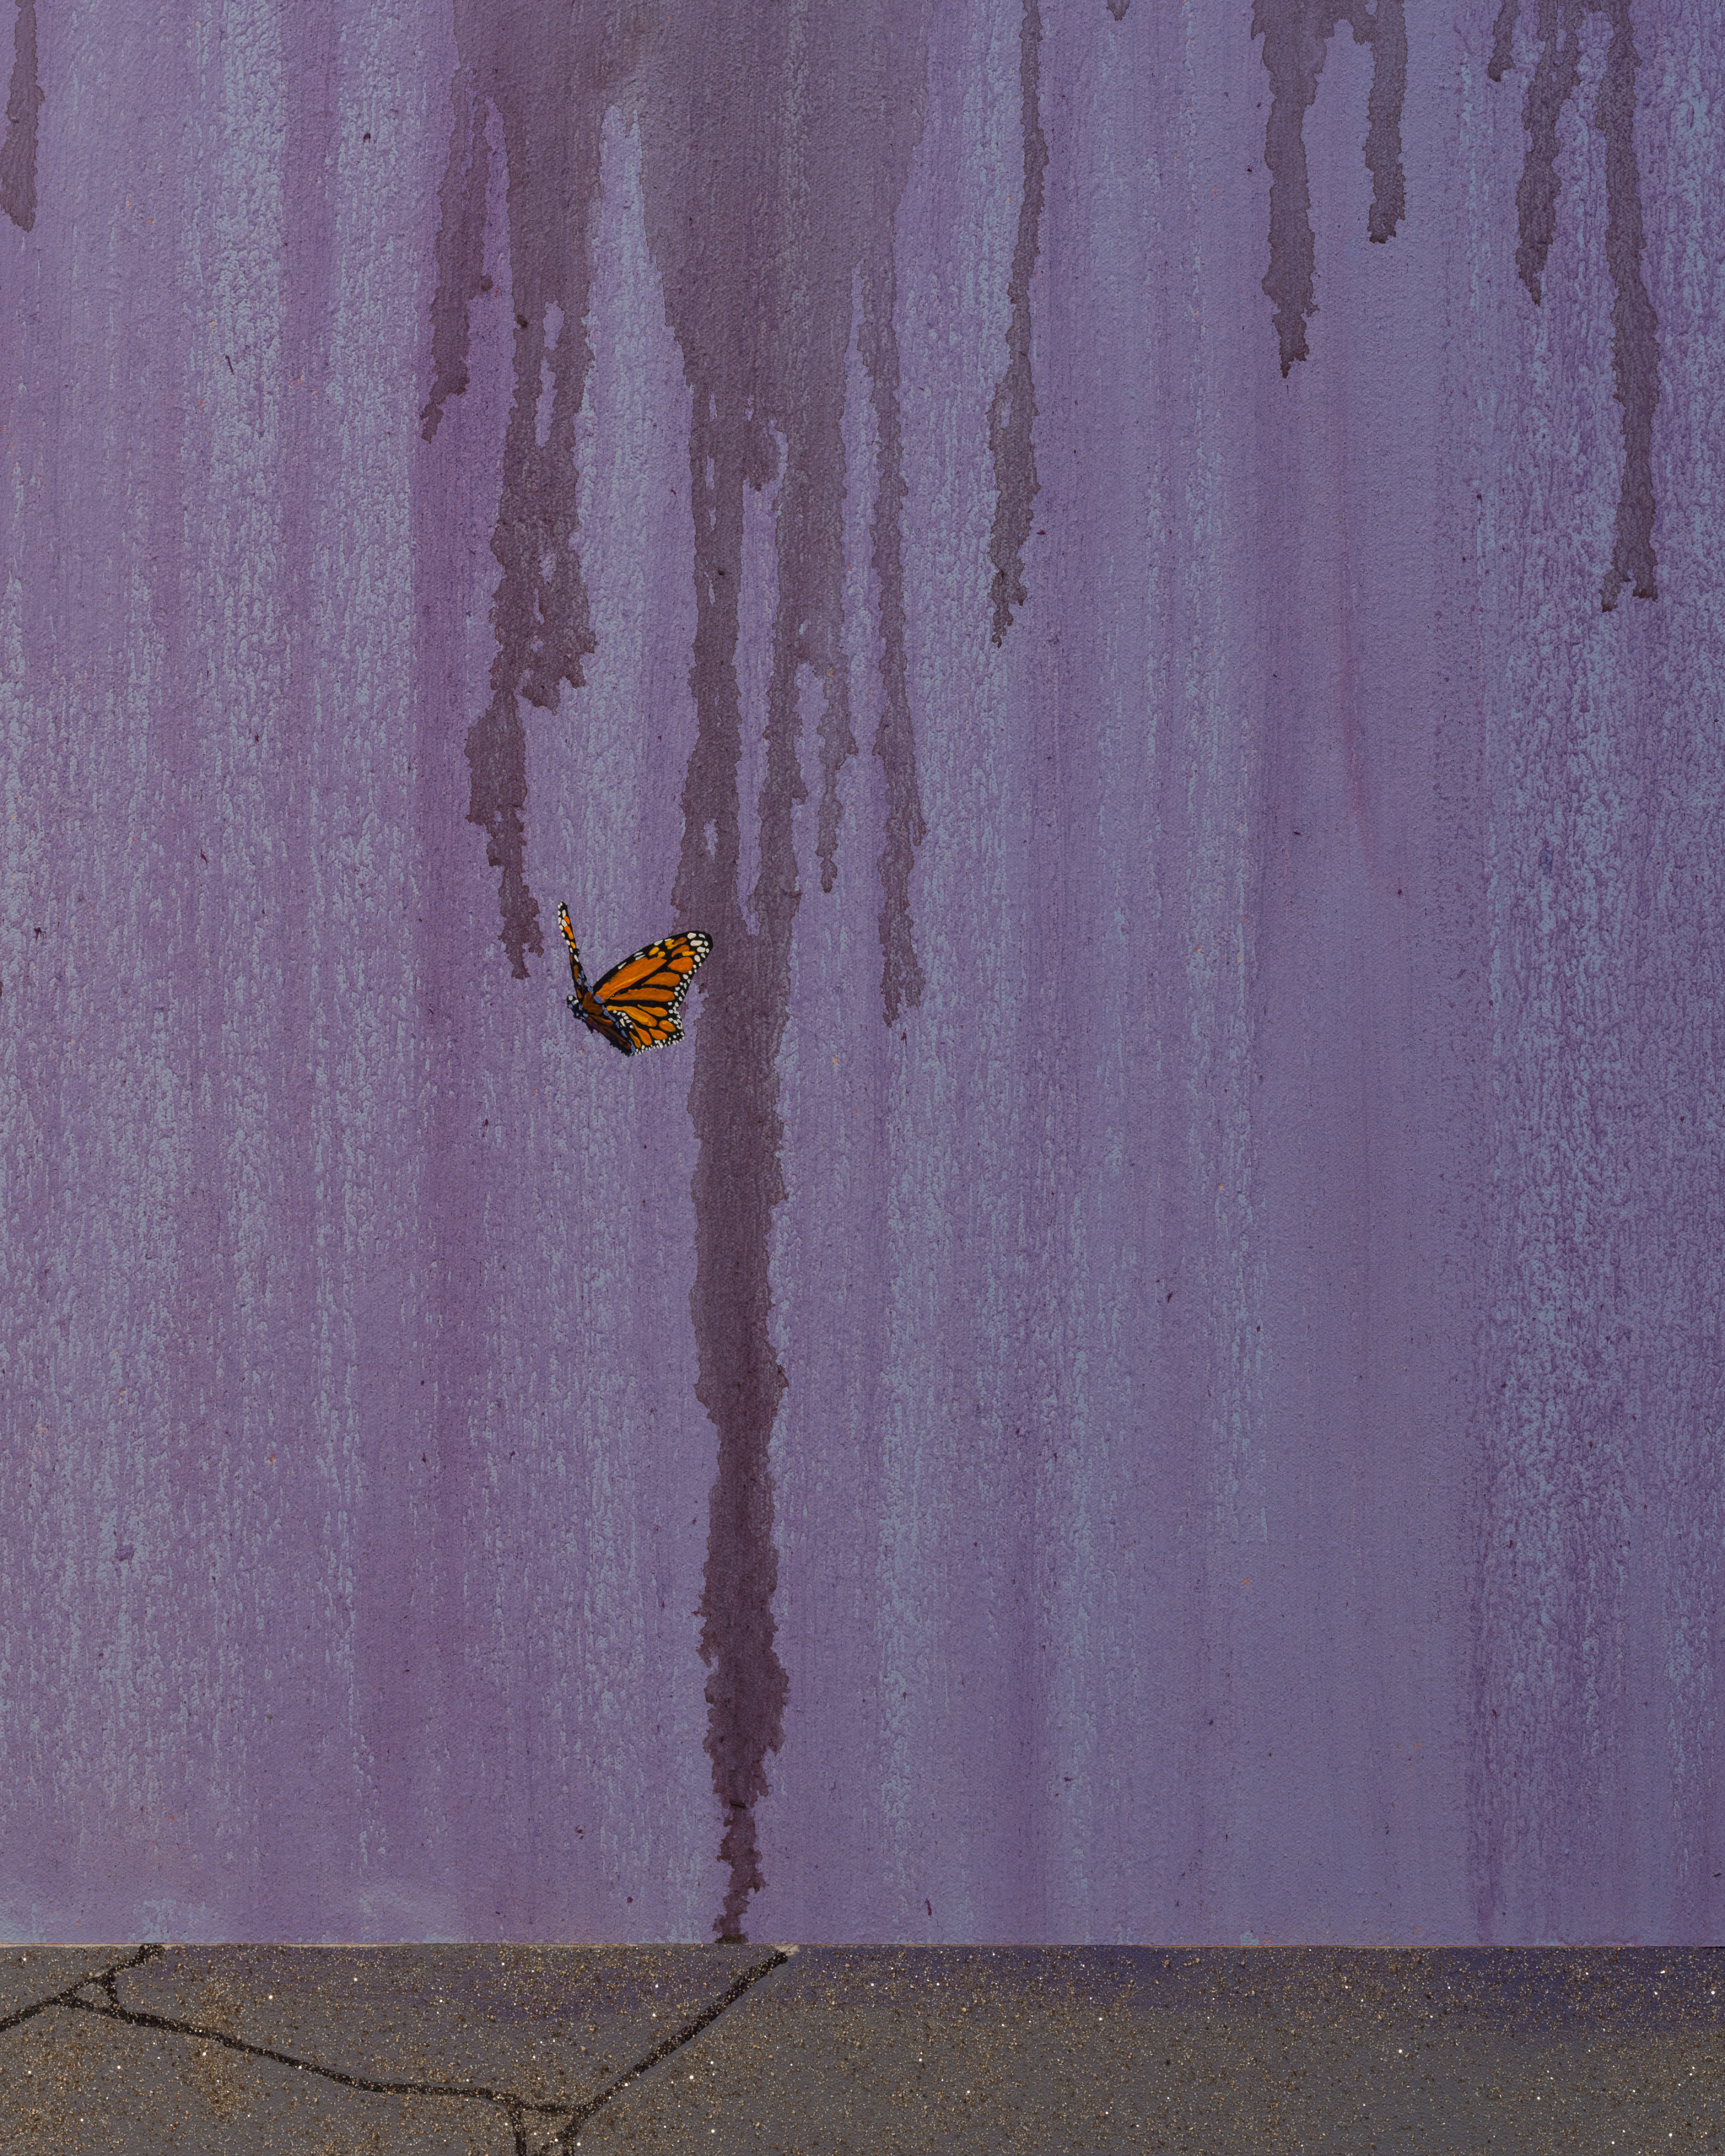 Detail of Tidawhitney Lek's "Richie's Liquor" depicting a monarch butterfly in flight in front of a stained wall.